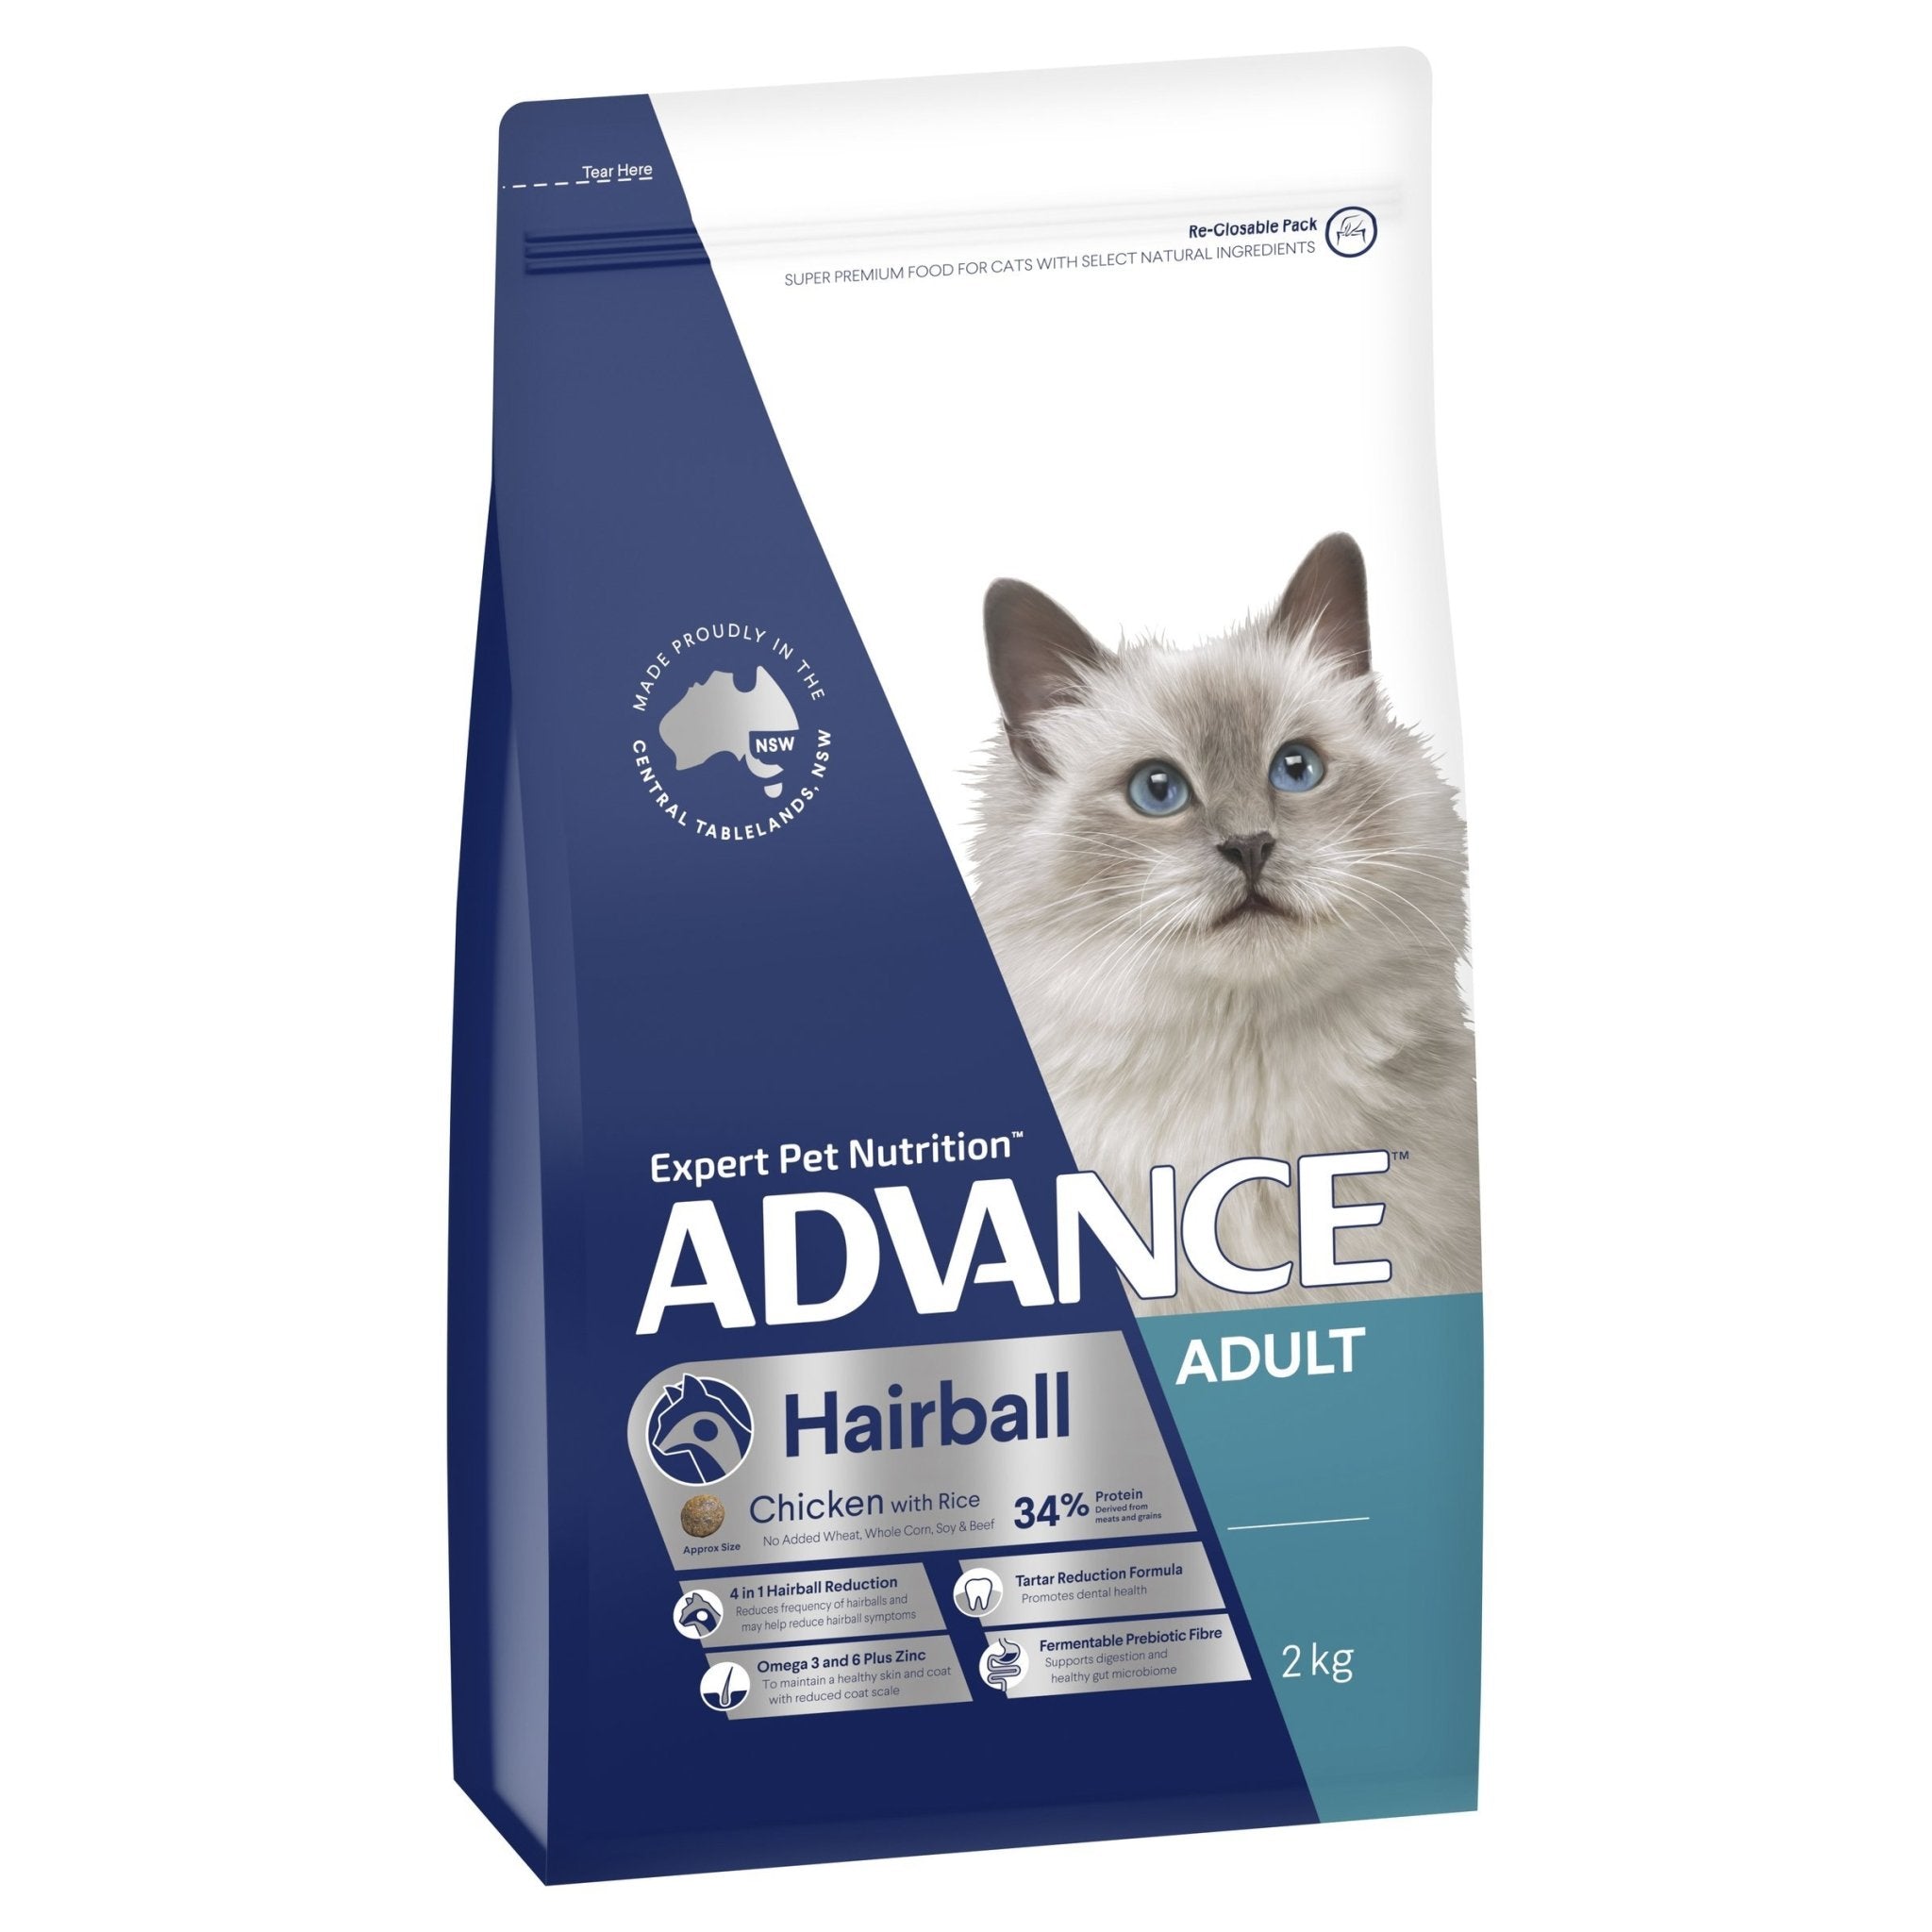 ADVANCE Hairball Adult Dry Cat Food Chicken with Rice 2kg Bag